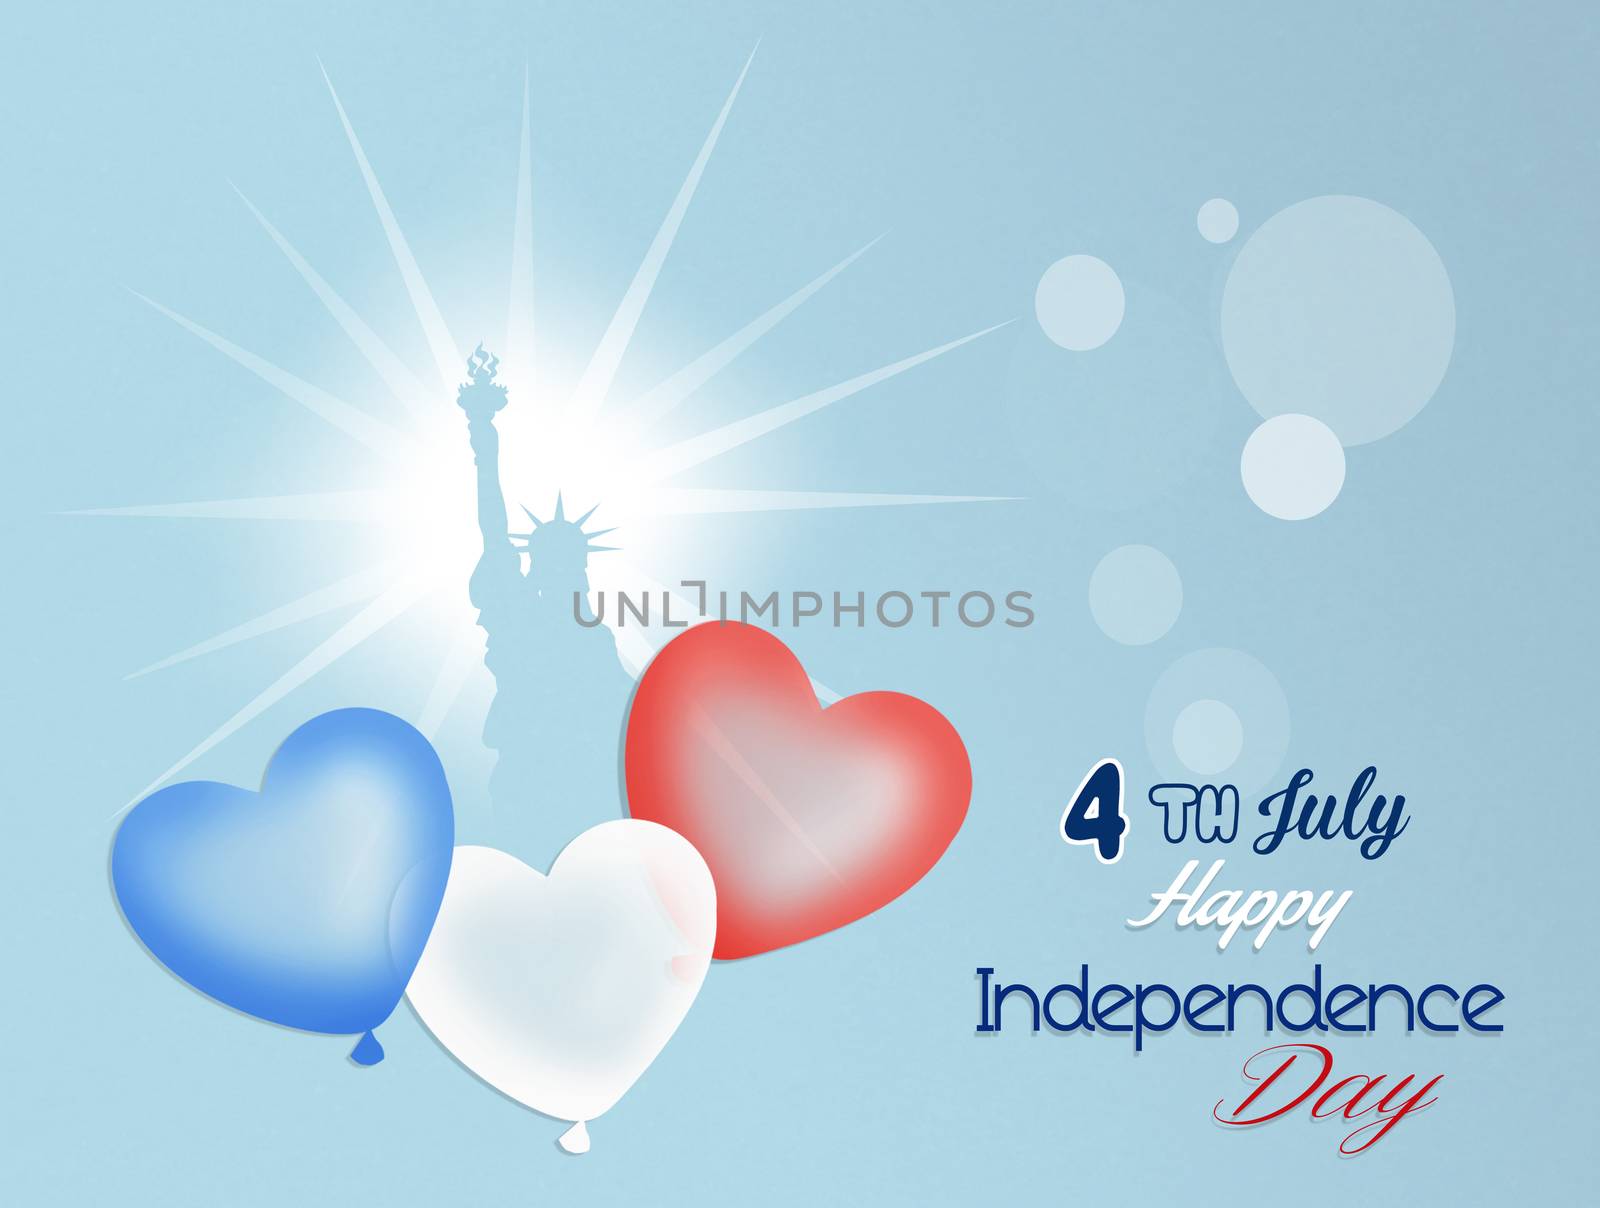 illustration of Independence Day, 4th of July